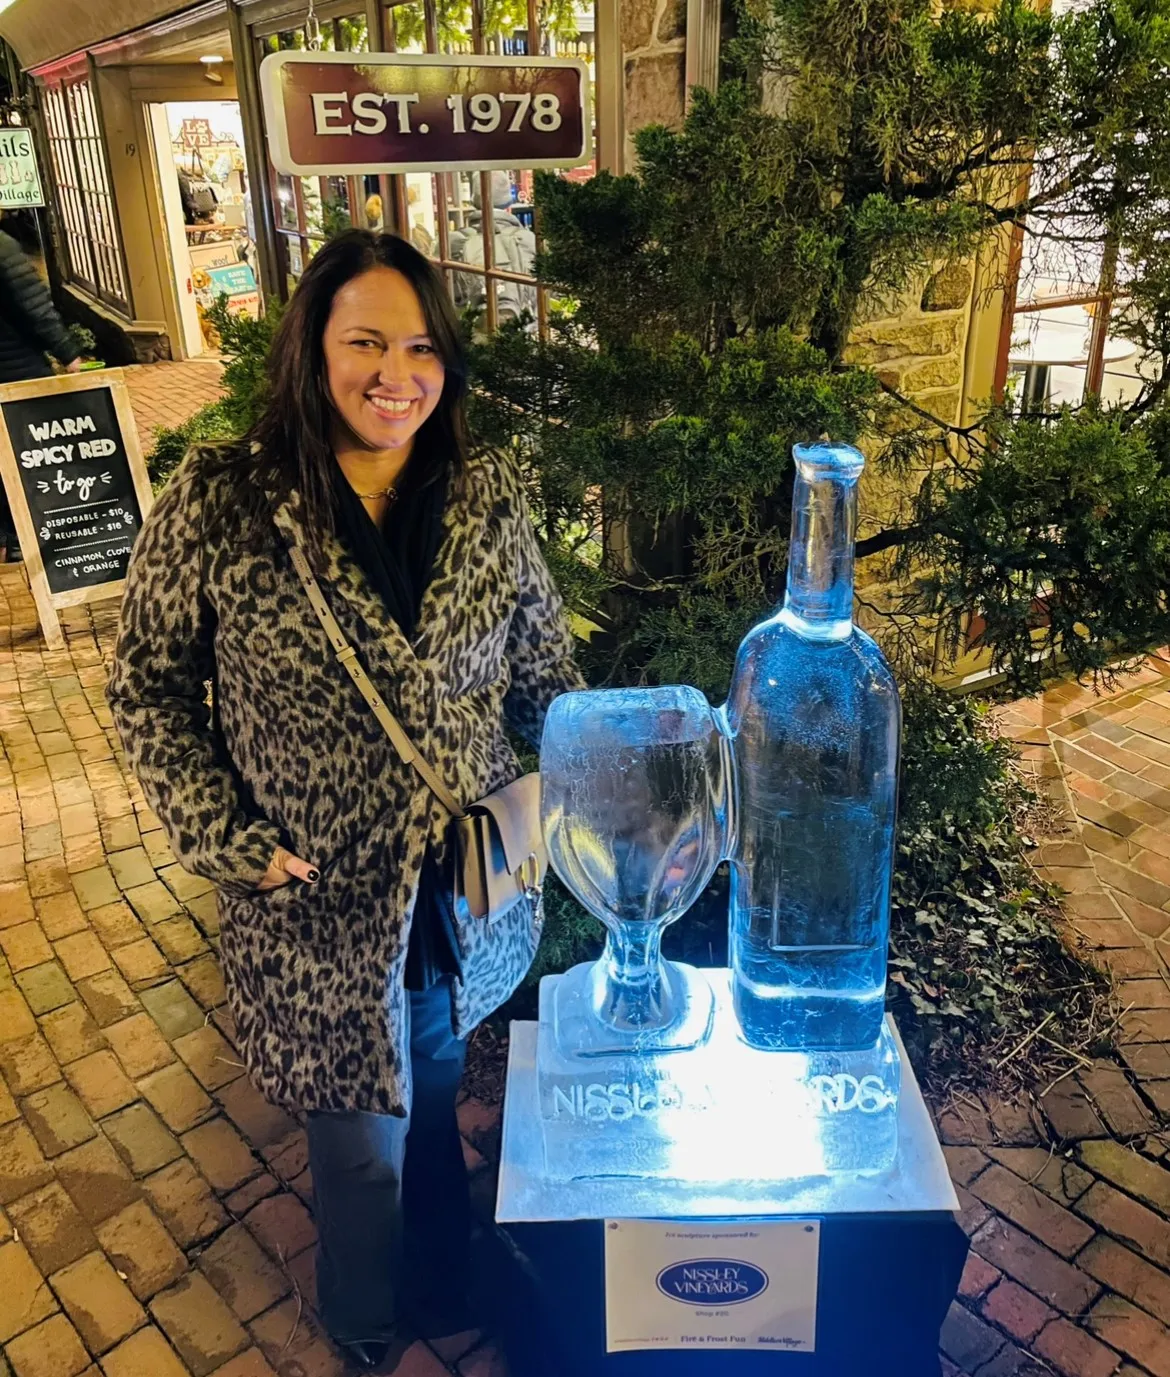 Kathy next to bottle and wine glass ice sculpture